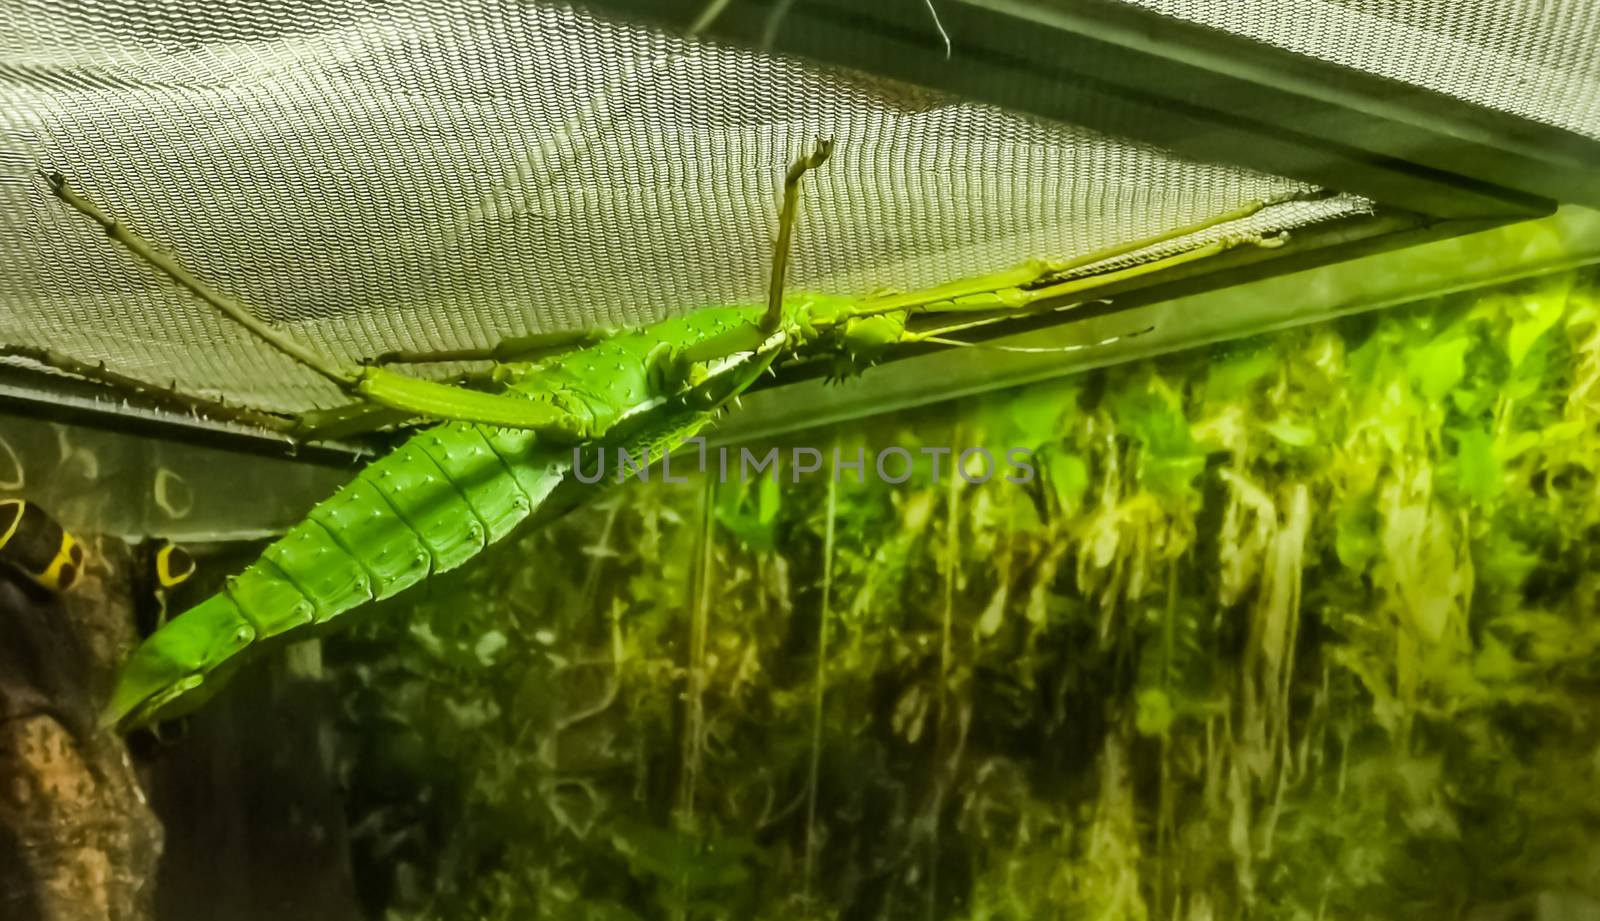 green female malayan jungle nymph in closeup, walking stick insect specie from Asia by charlottebleijenberg